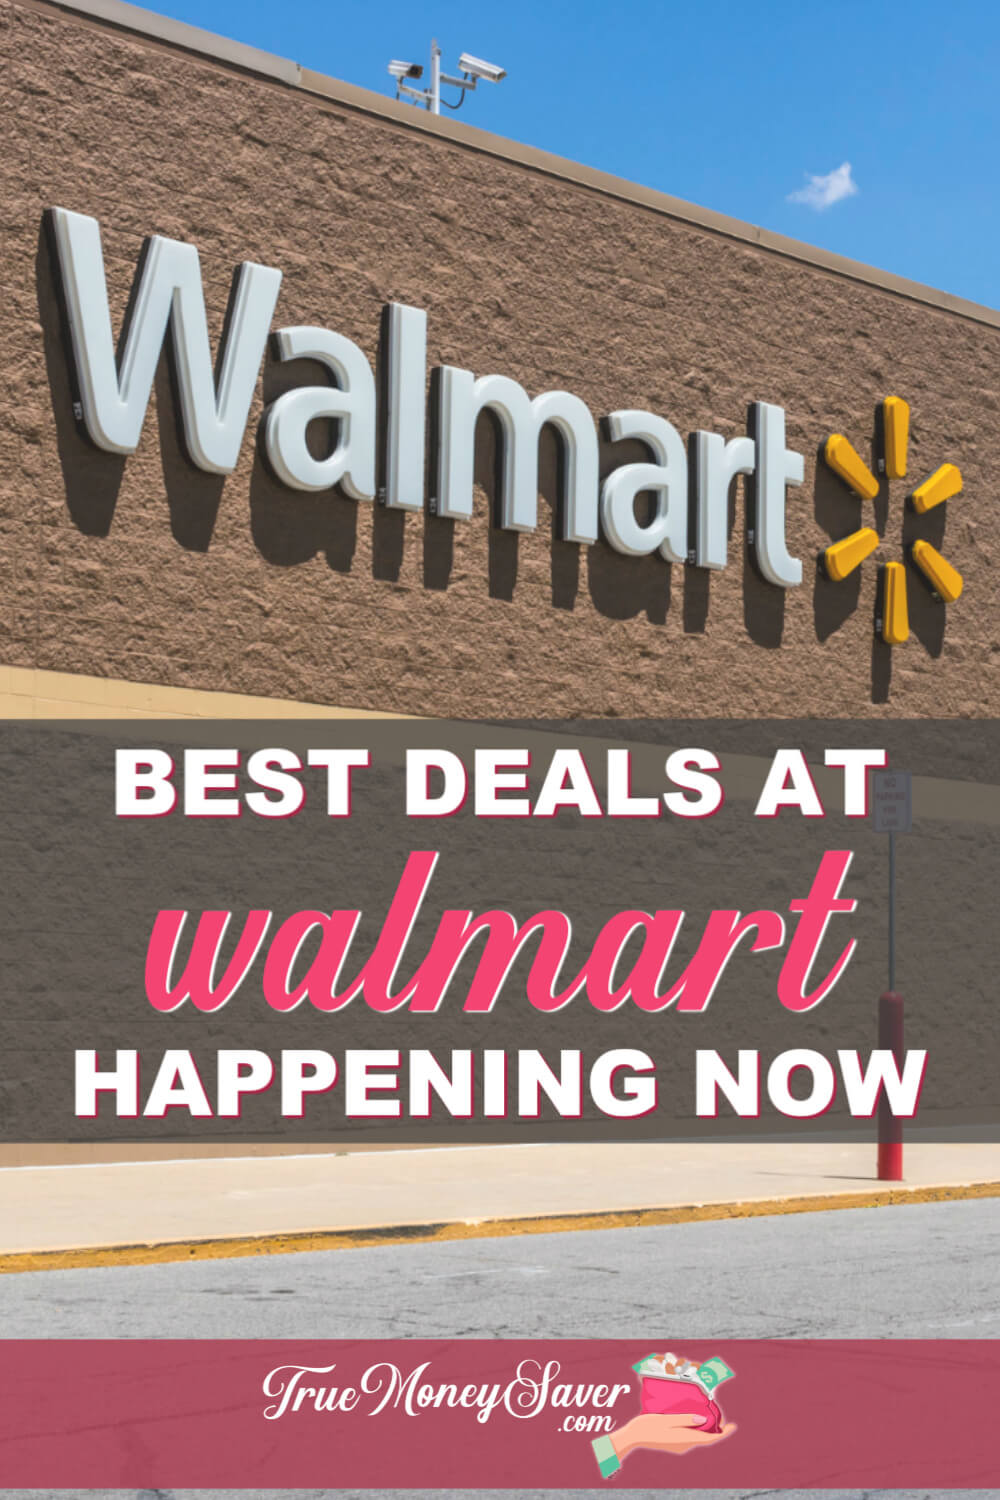 Walmart Deals: See These 12 Freebies And 12 Deals 76¢ Or Less At Walmart Right Now!